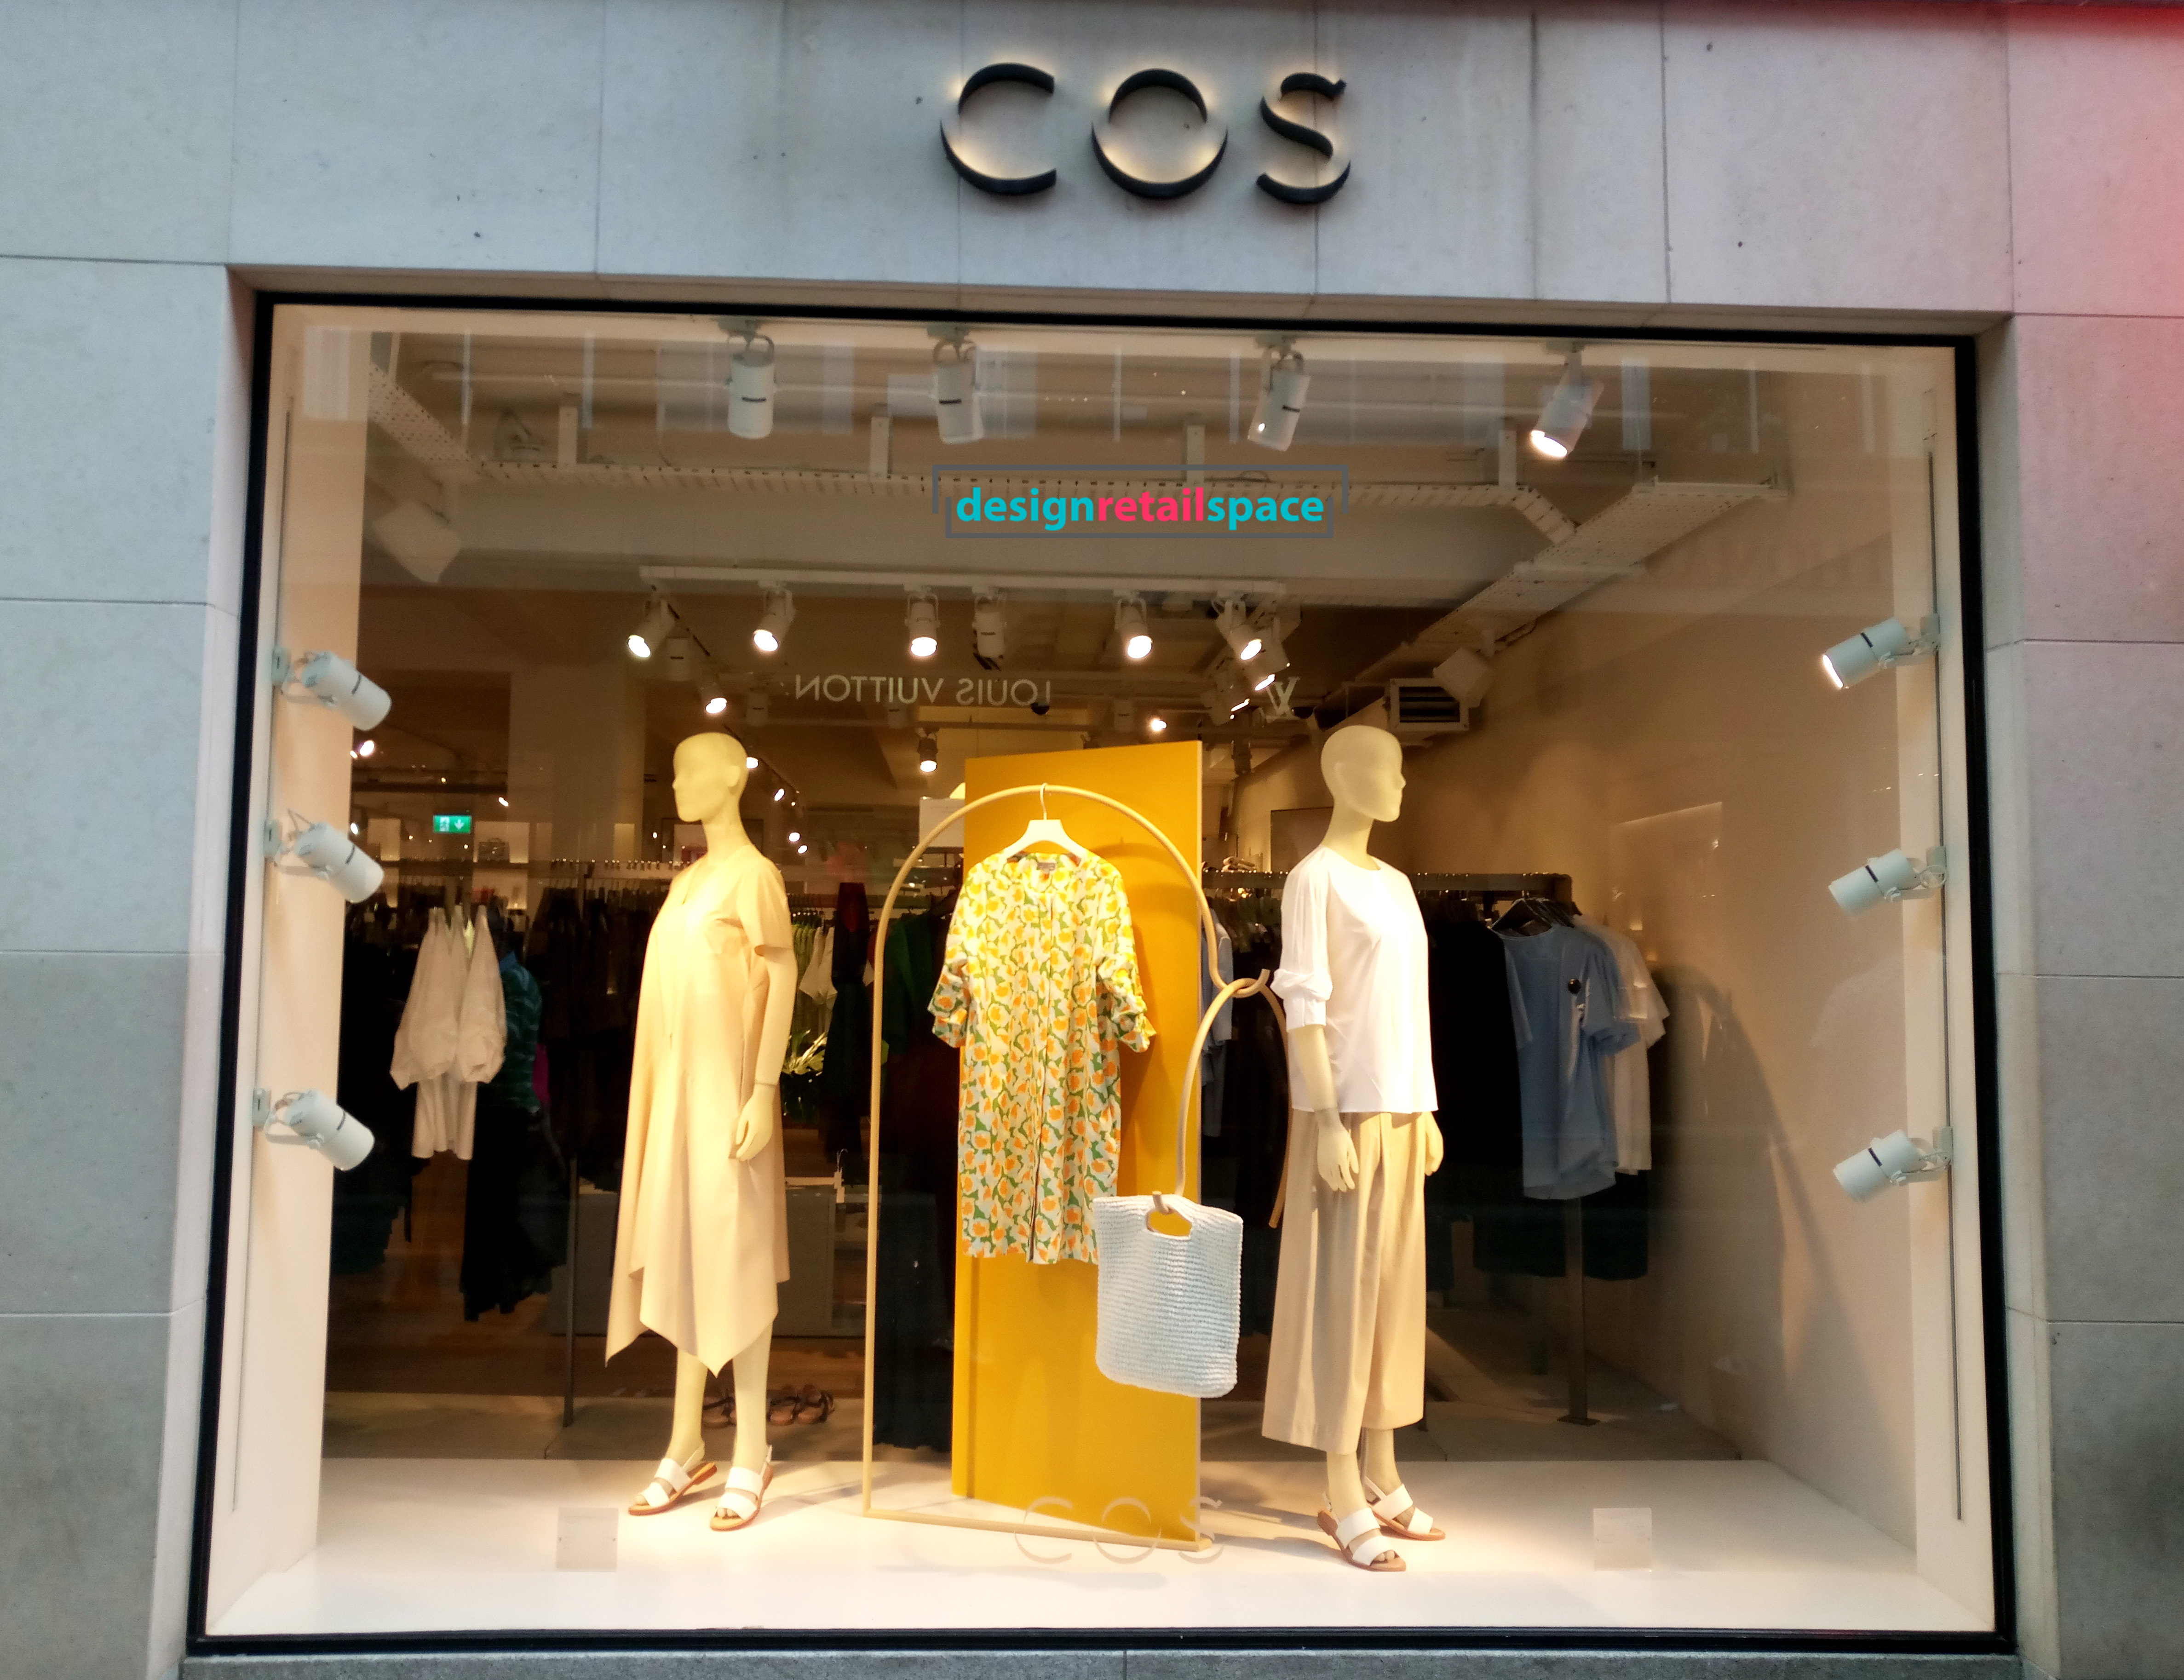 COS fashion shop with yellow known as Gen Z yellow accent on the window display